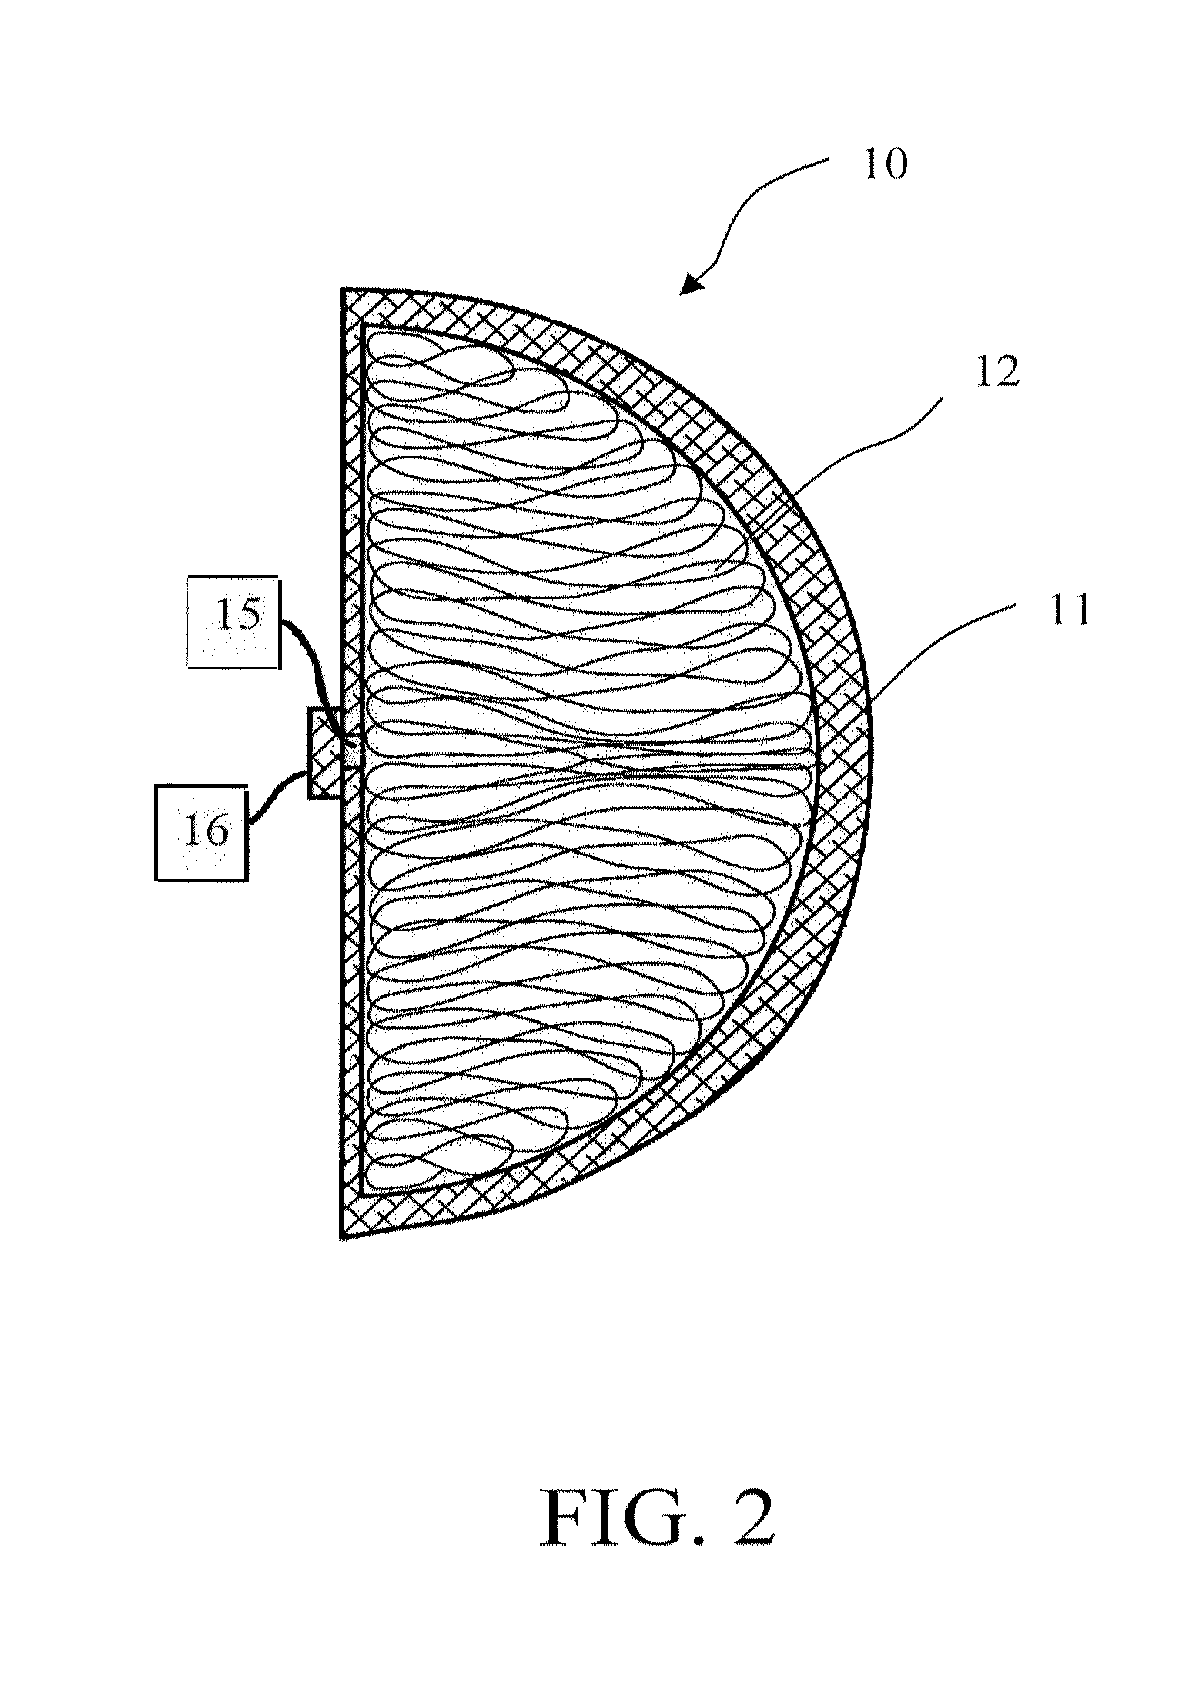 Breast implants and methods of manufacture